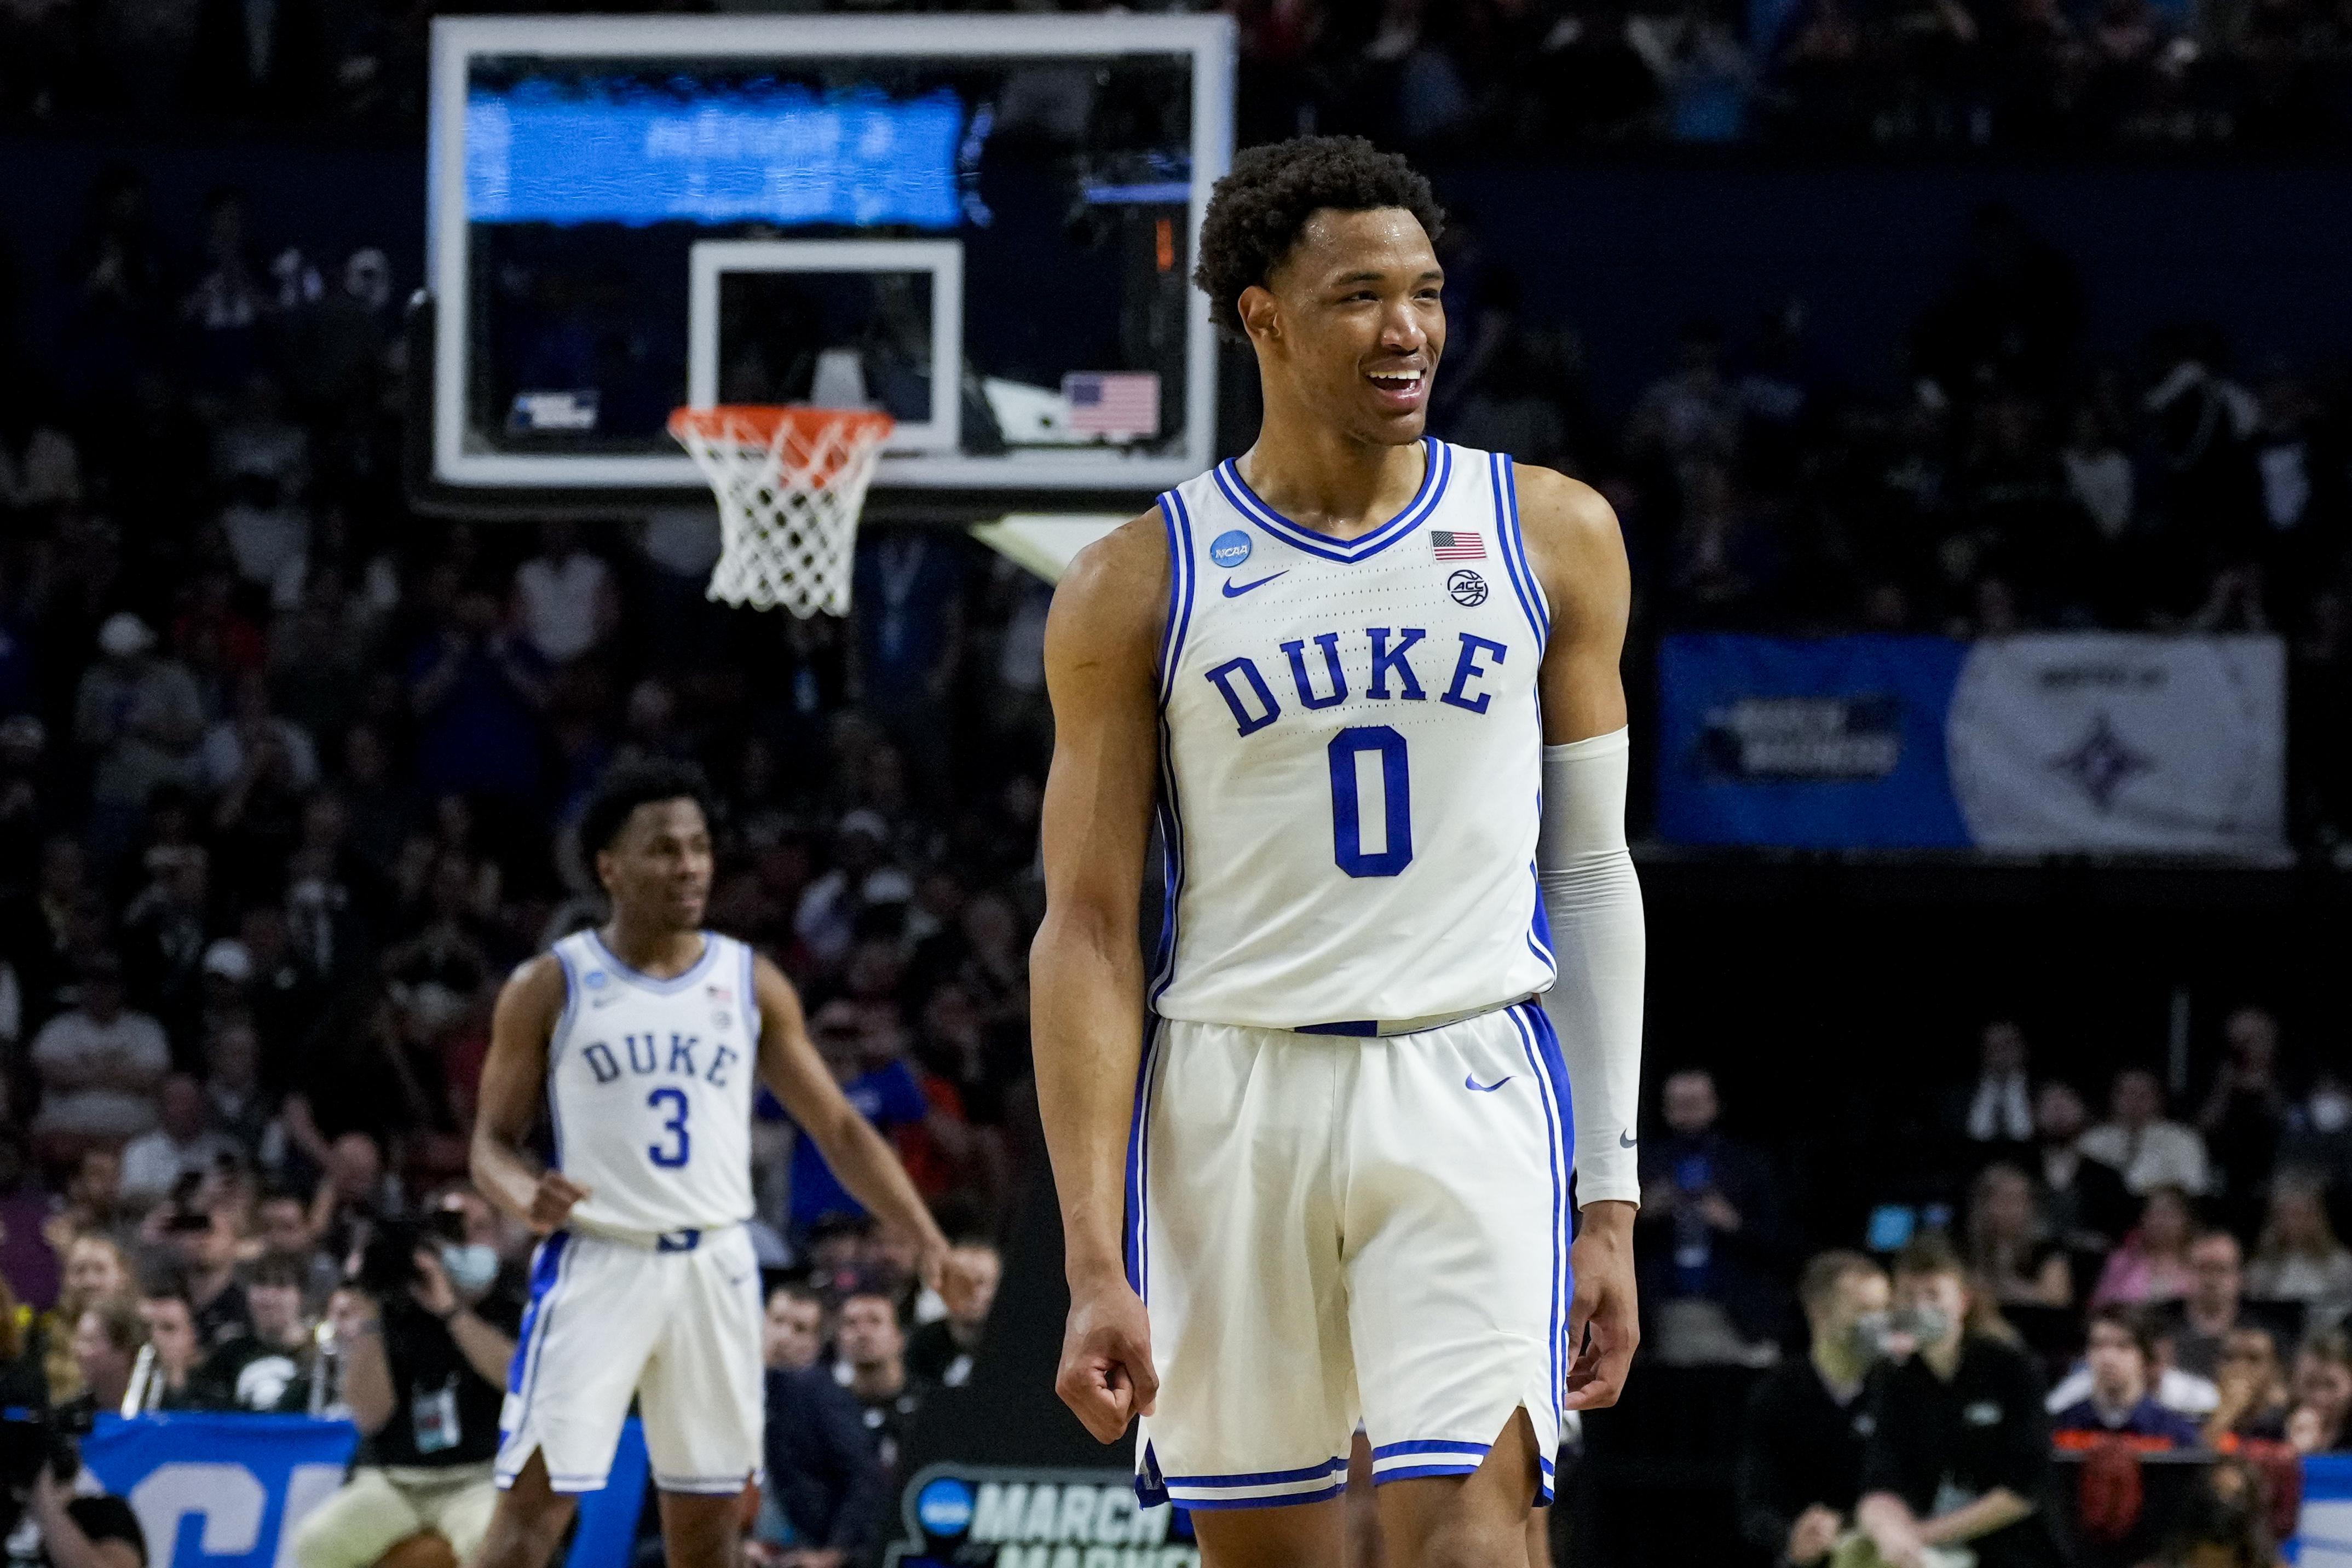 Duke NCAA Tournament History: National Championships, All-Time Record, Best March Madness Results & More